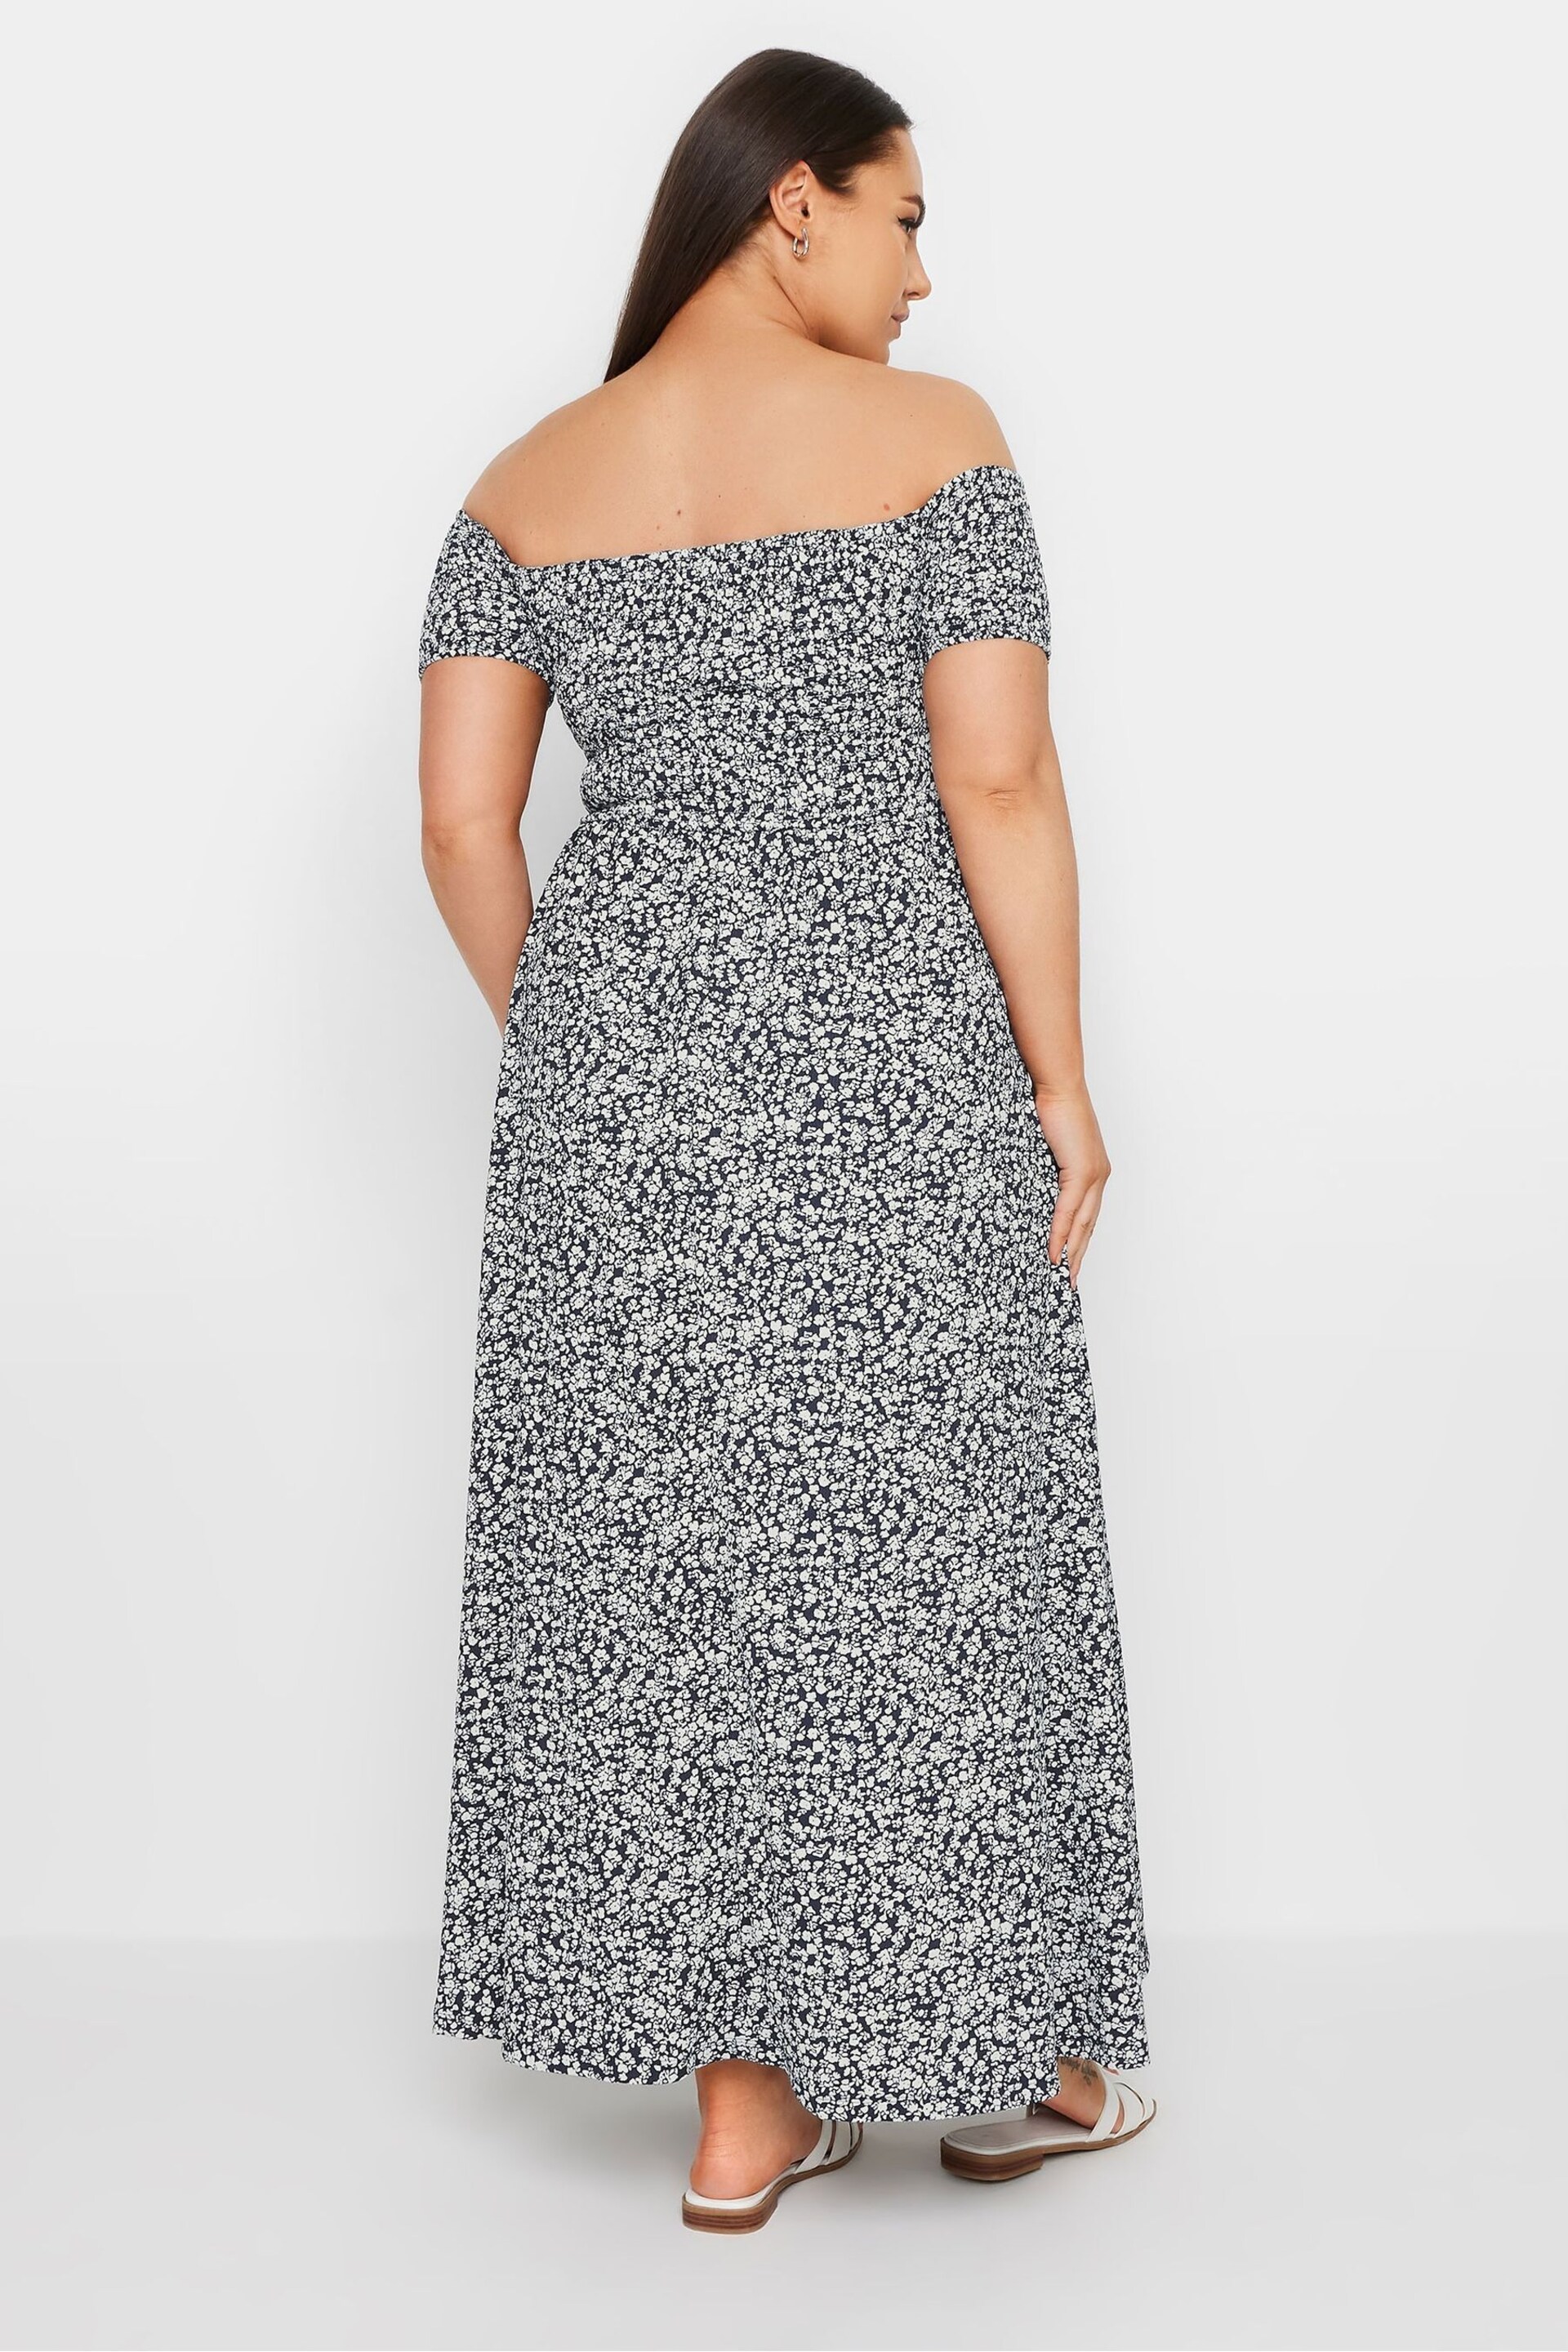 Yours Curve Blue Dark Ditsy Shirred Midaxi Dress - Image 3 of 5